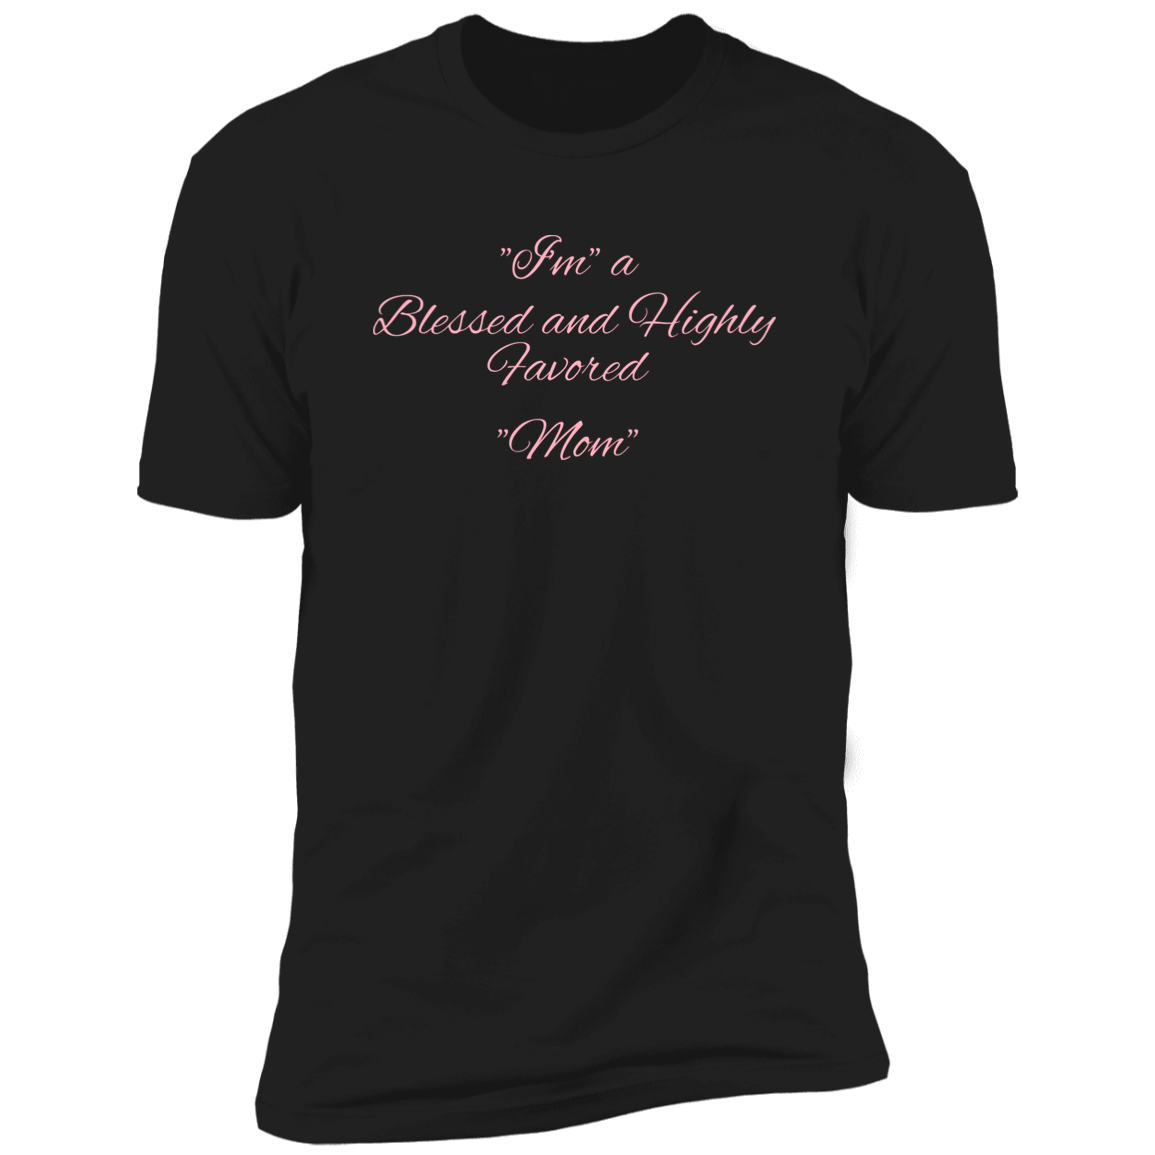 Blessed & Favored Short Sleeve T-Shirt